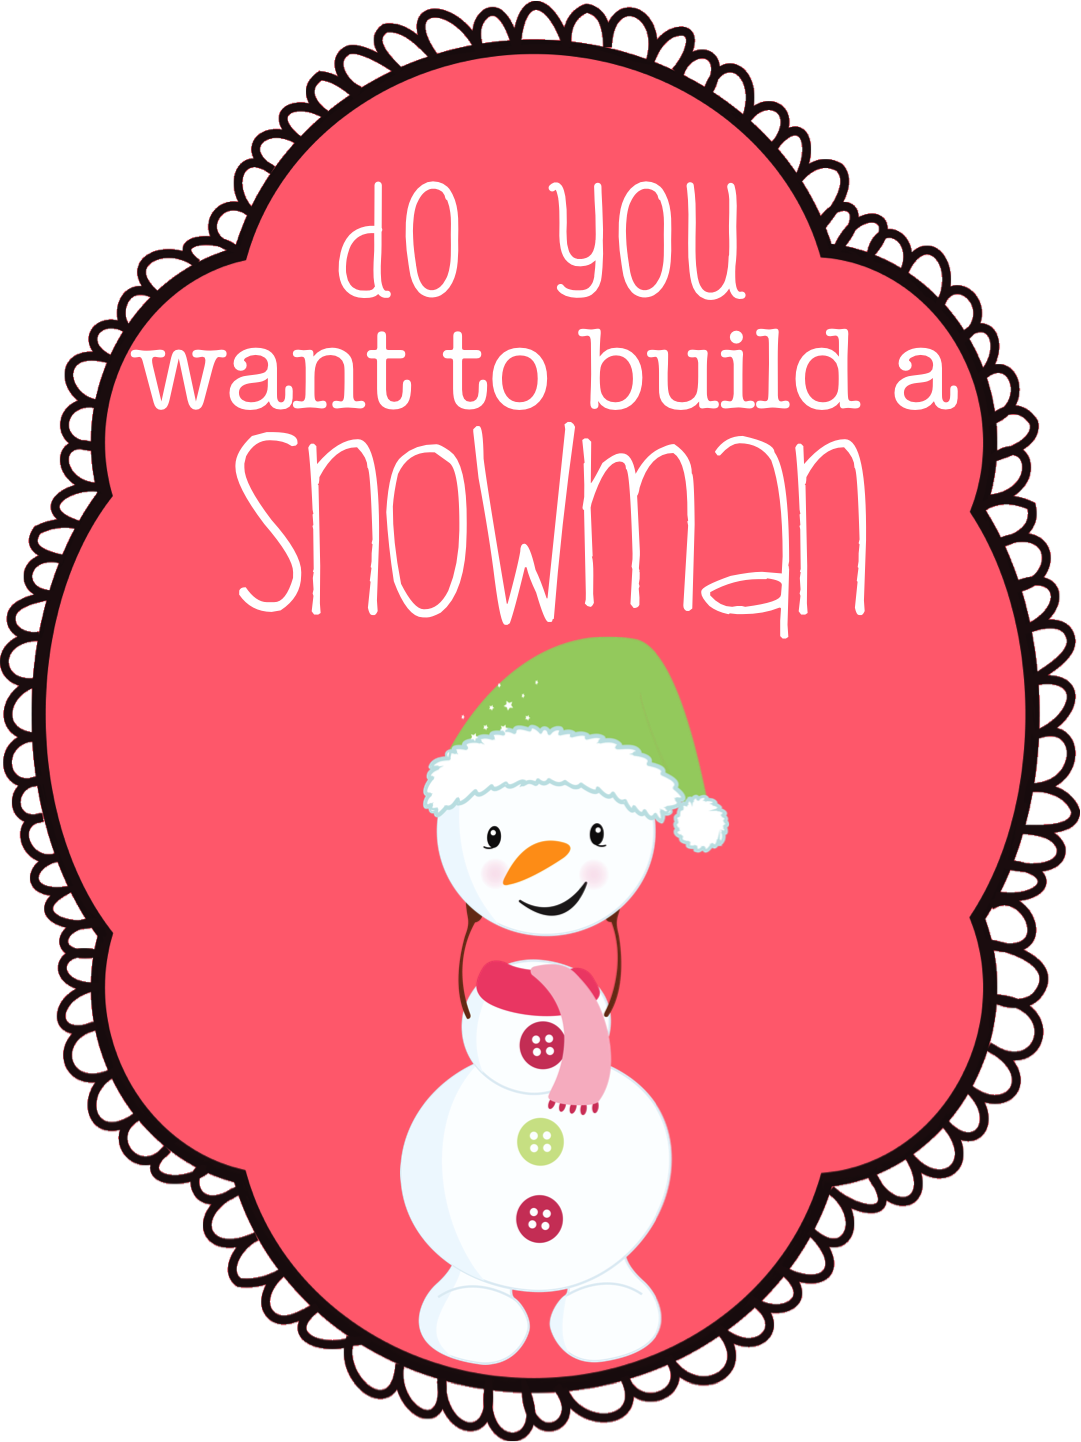 jedi-craft-girl-do-you-want-to-build-a-snowman